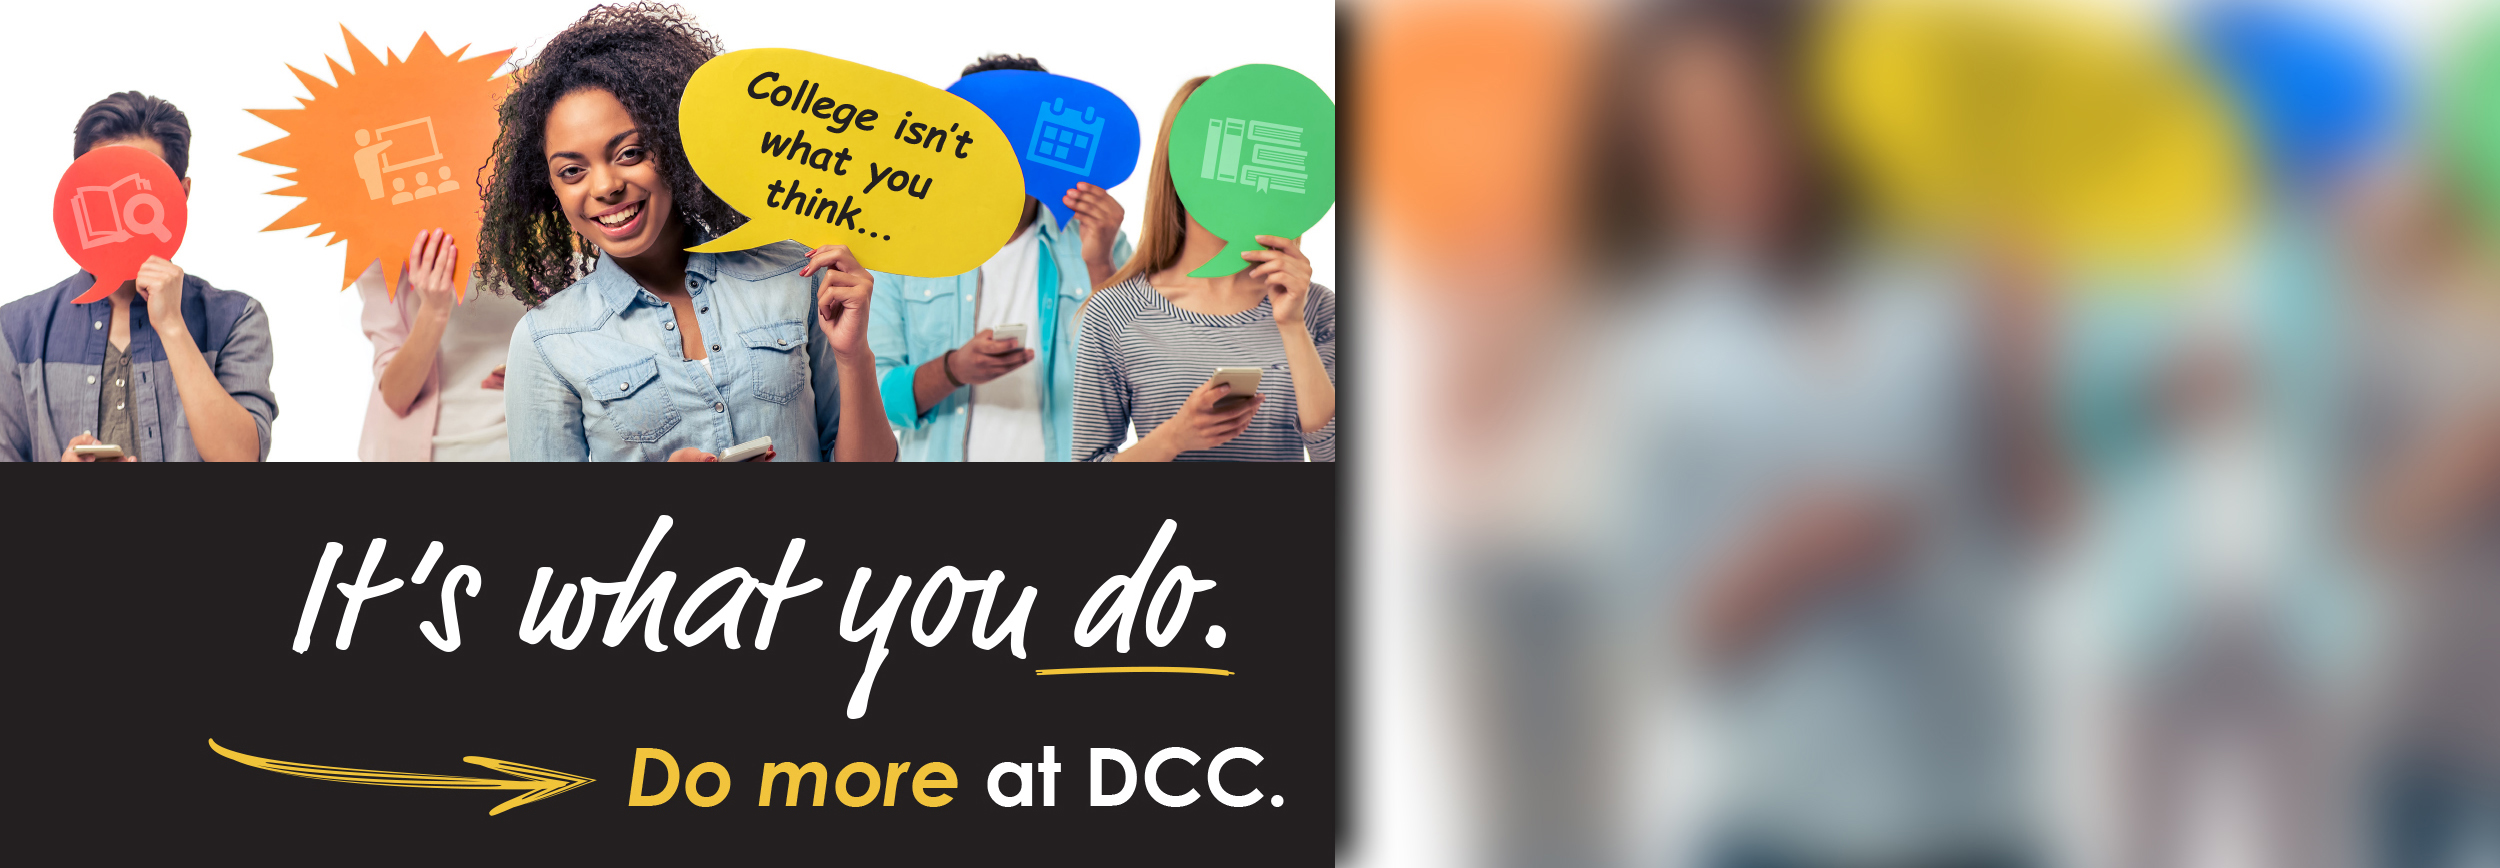 image of students holding up thought bubbles with education-themed icons and text that says college is not what you think, it's what you do. Do more at DCC